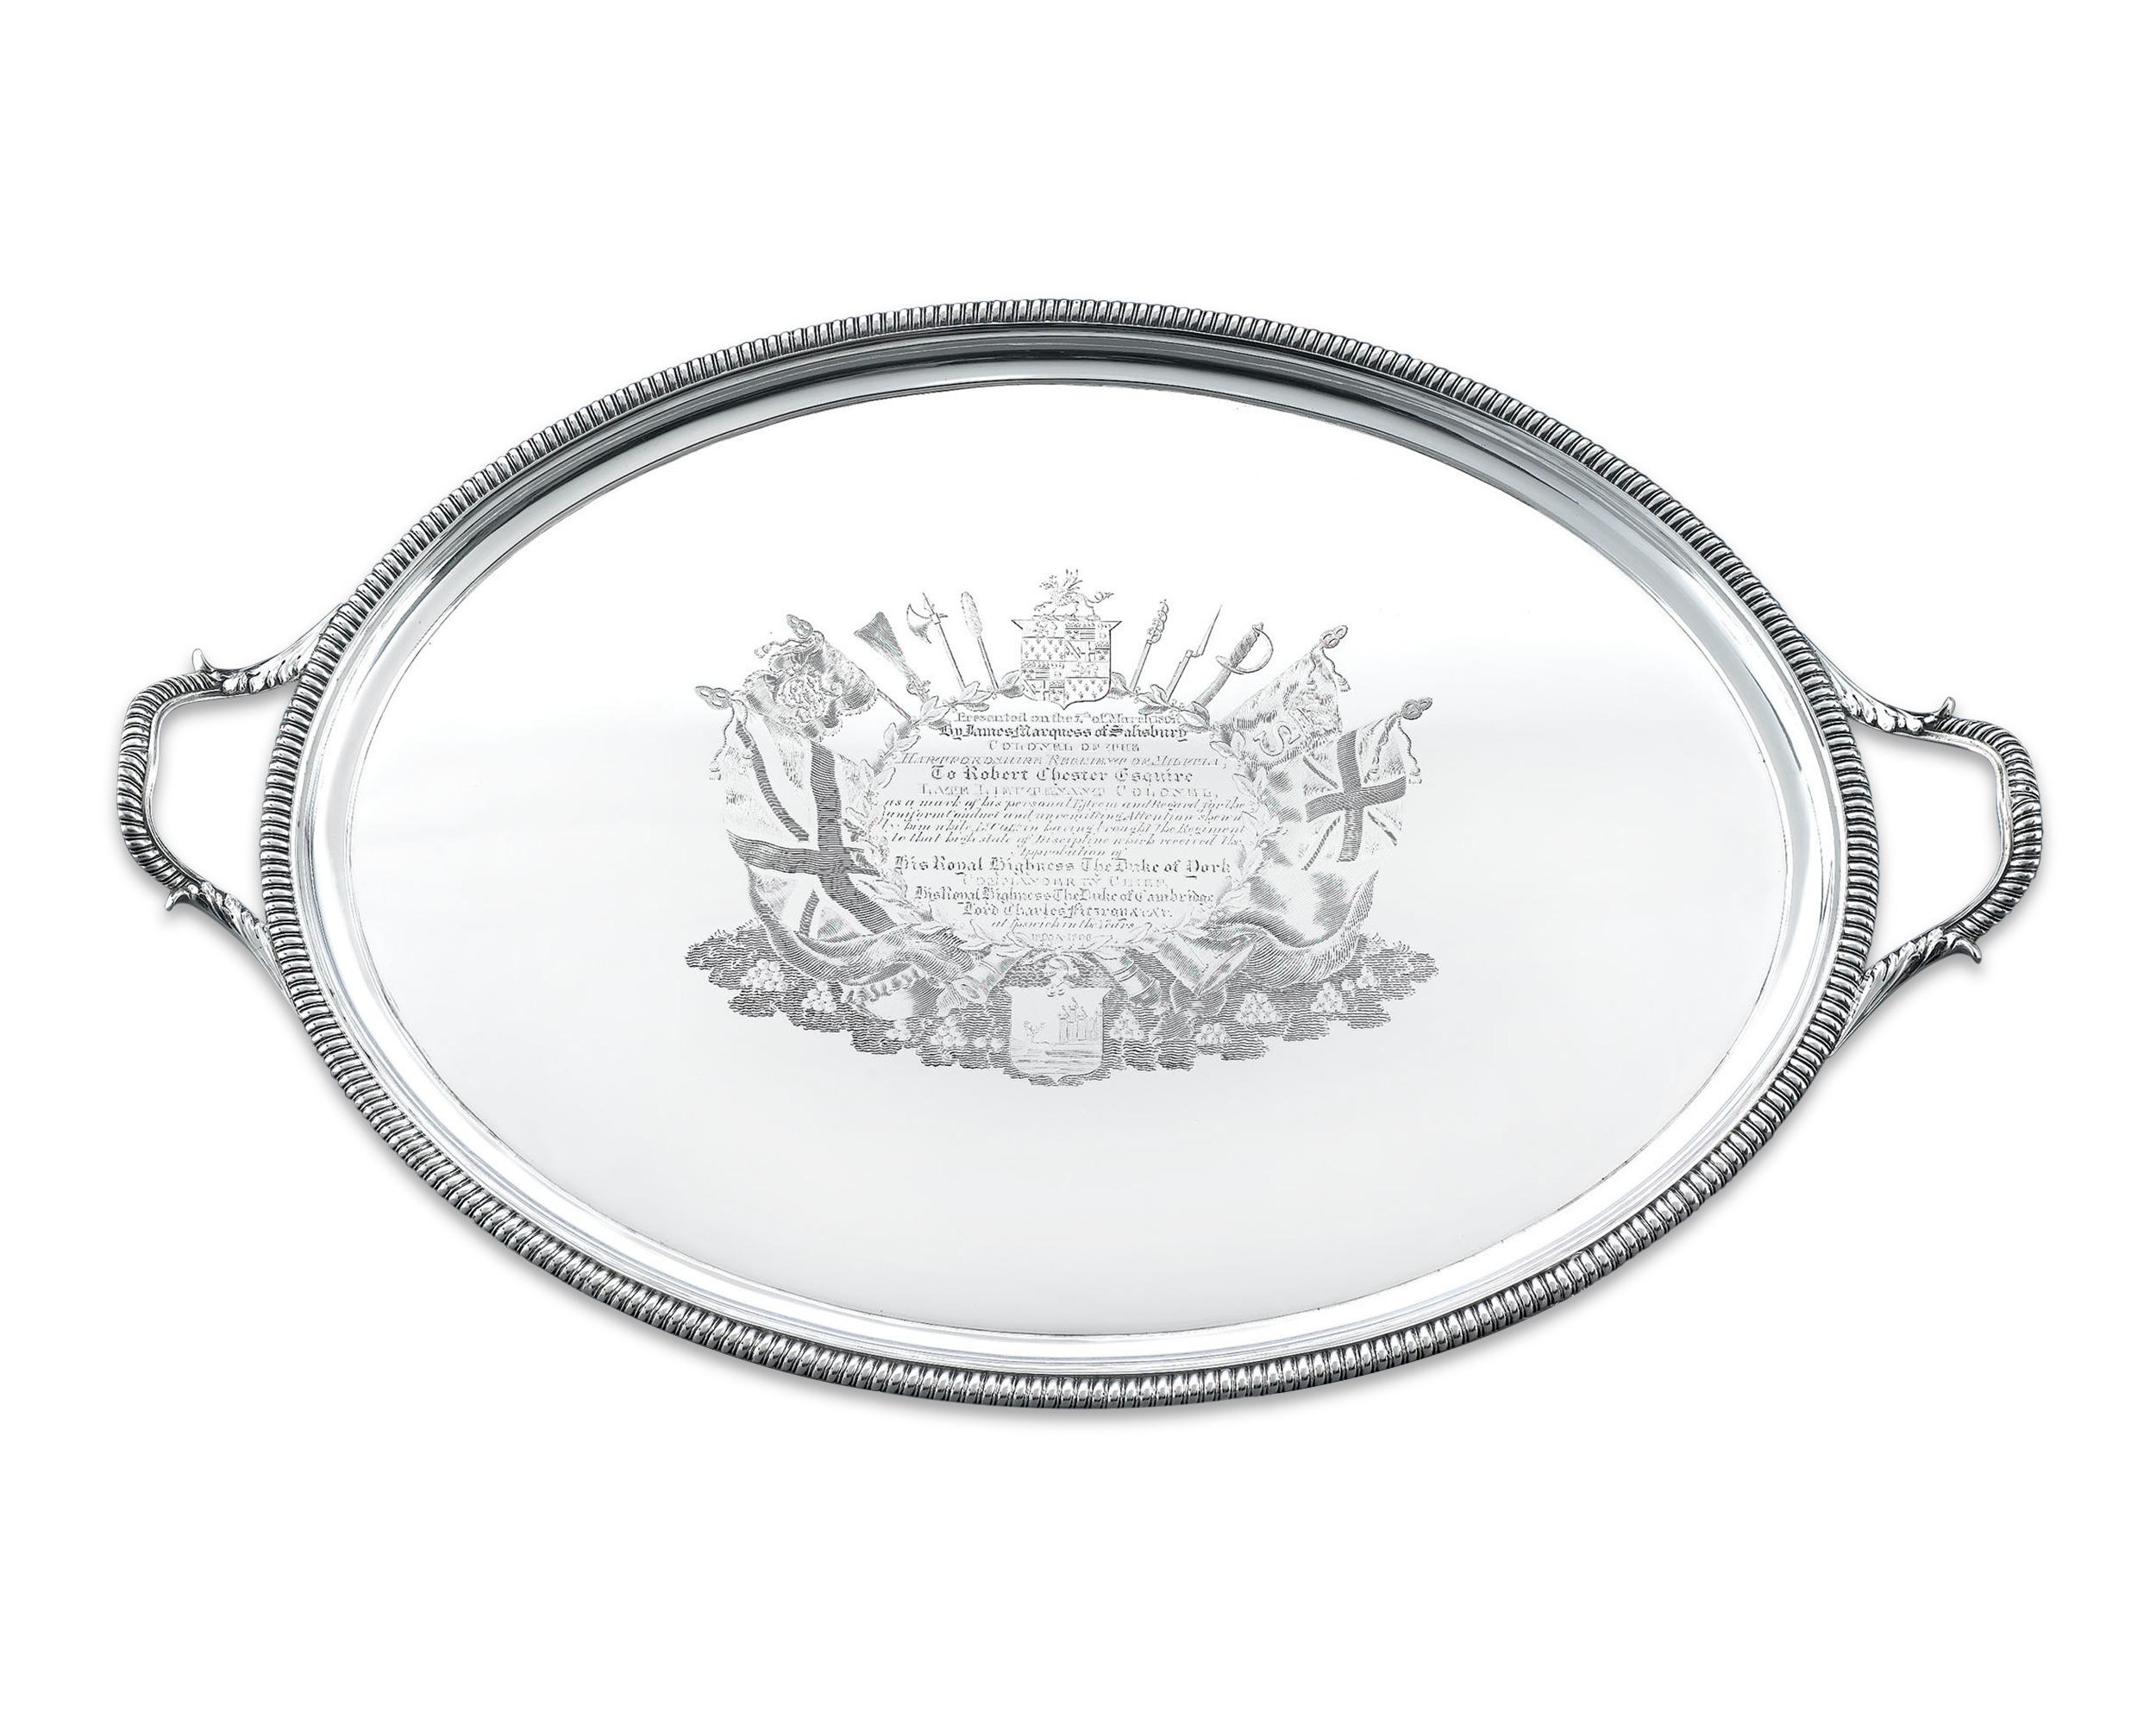 This fascinating George III silver tray is a work of skillful English artistry, intricately chased and engraved it represents a prestigious commemorative gift for service. The tray rests on 4 bracket feet with oval handles and a delightful gadrooned